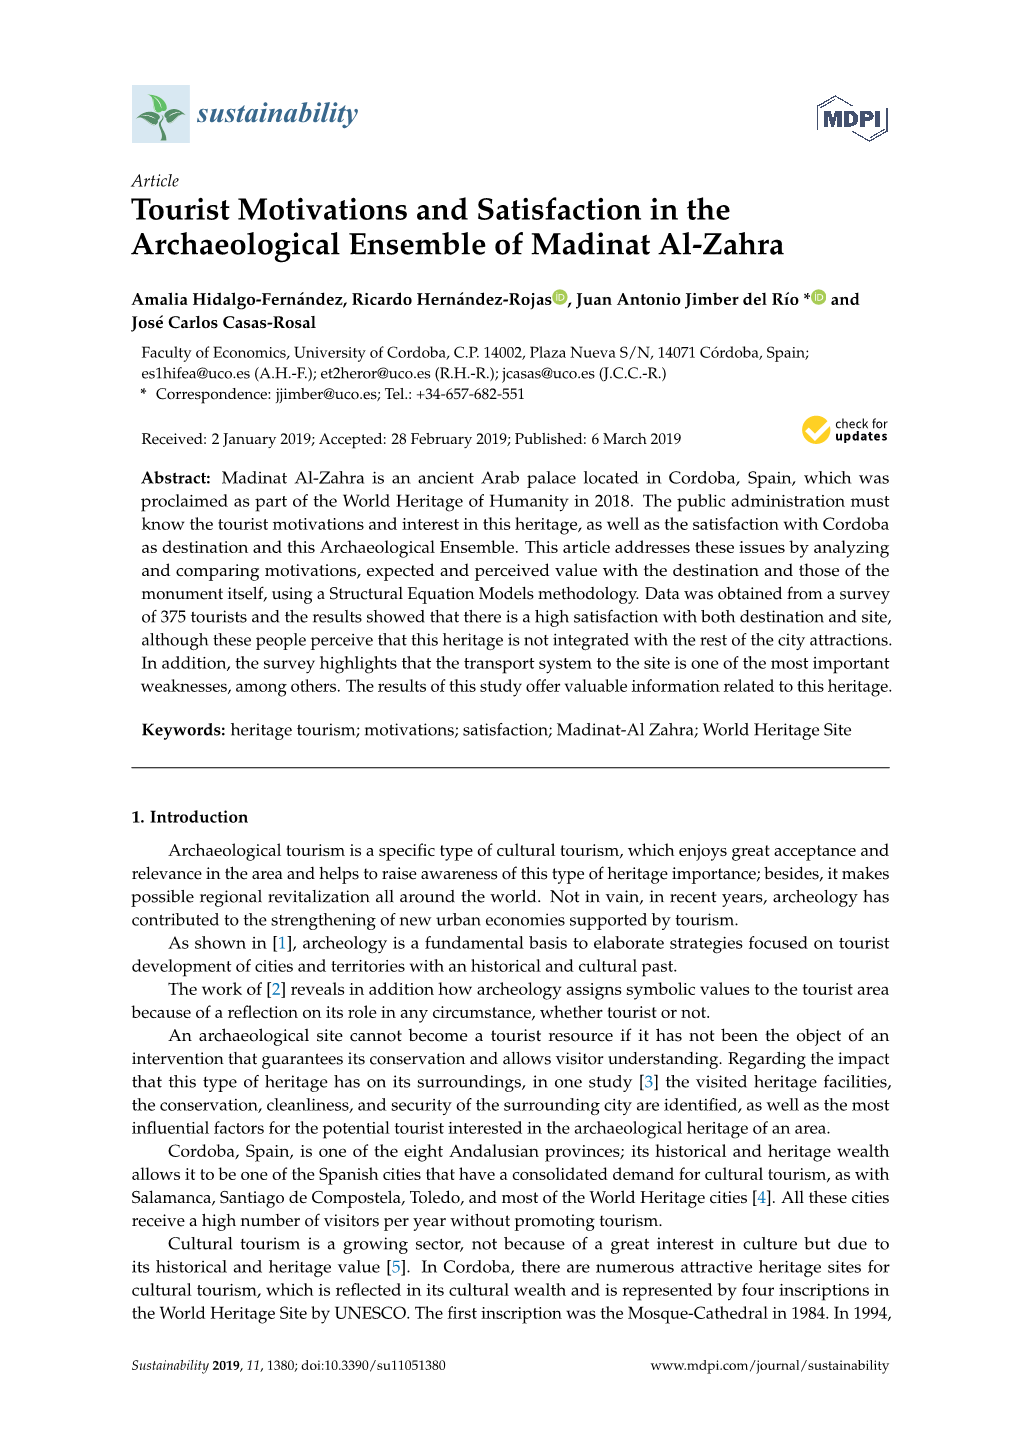 Tourist Motivations and Satisfaction in the Archaeological Ensemble of Madinat Al-Zahra